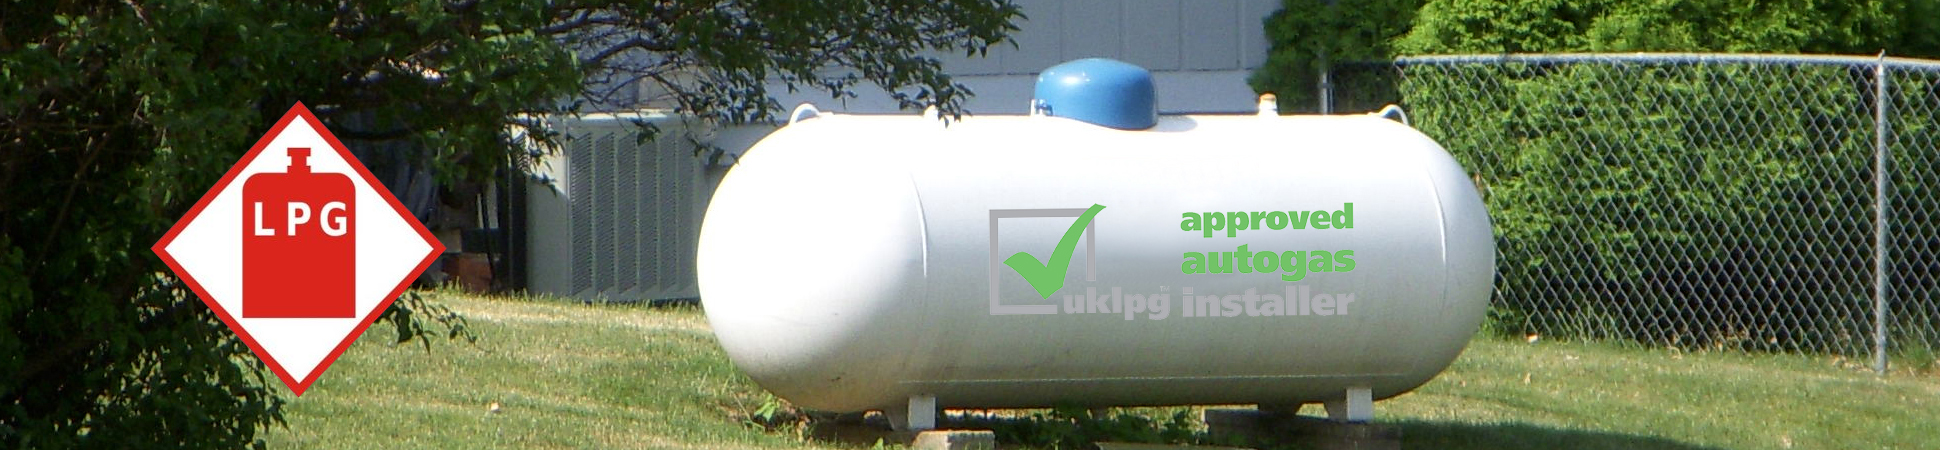 LPG Bulk Gas Services For Static Caravans and Holiday Homes